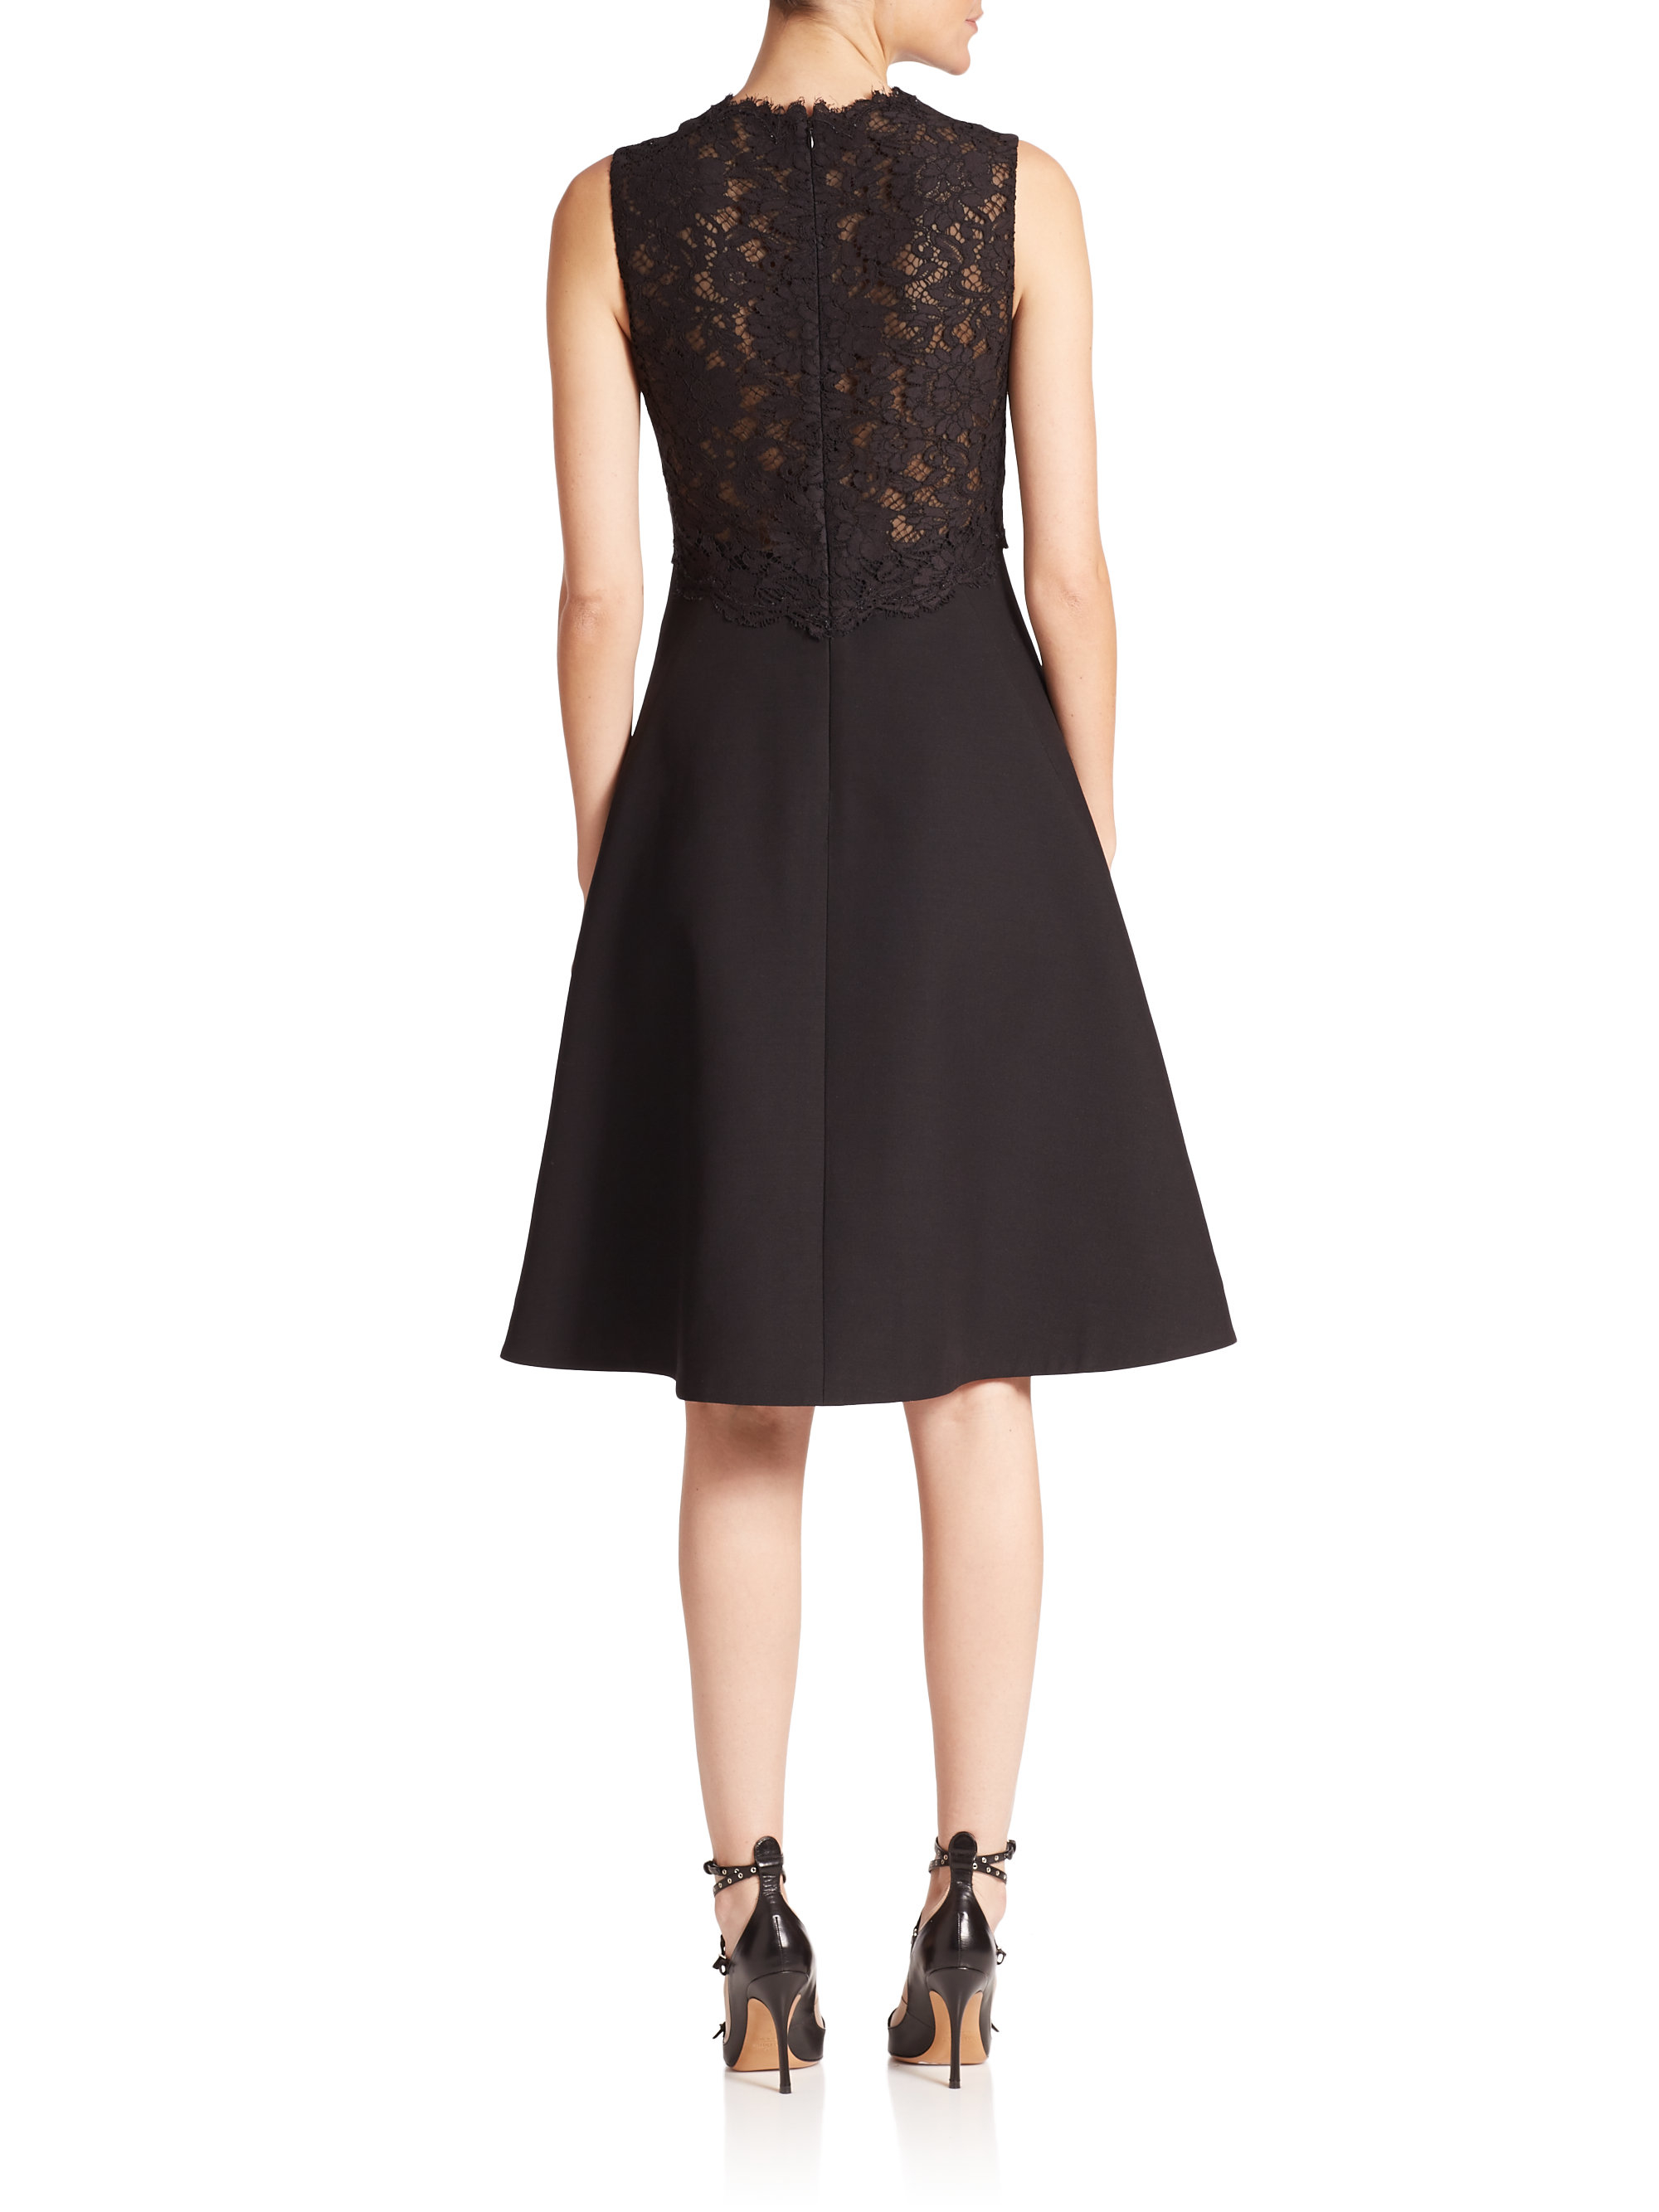 Lyst - Valentino Lace & Crepe Dress in Black